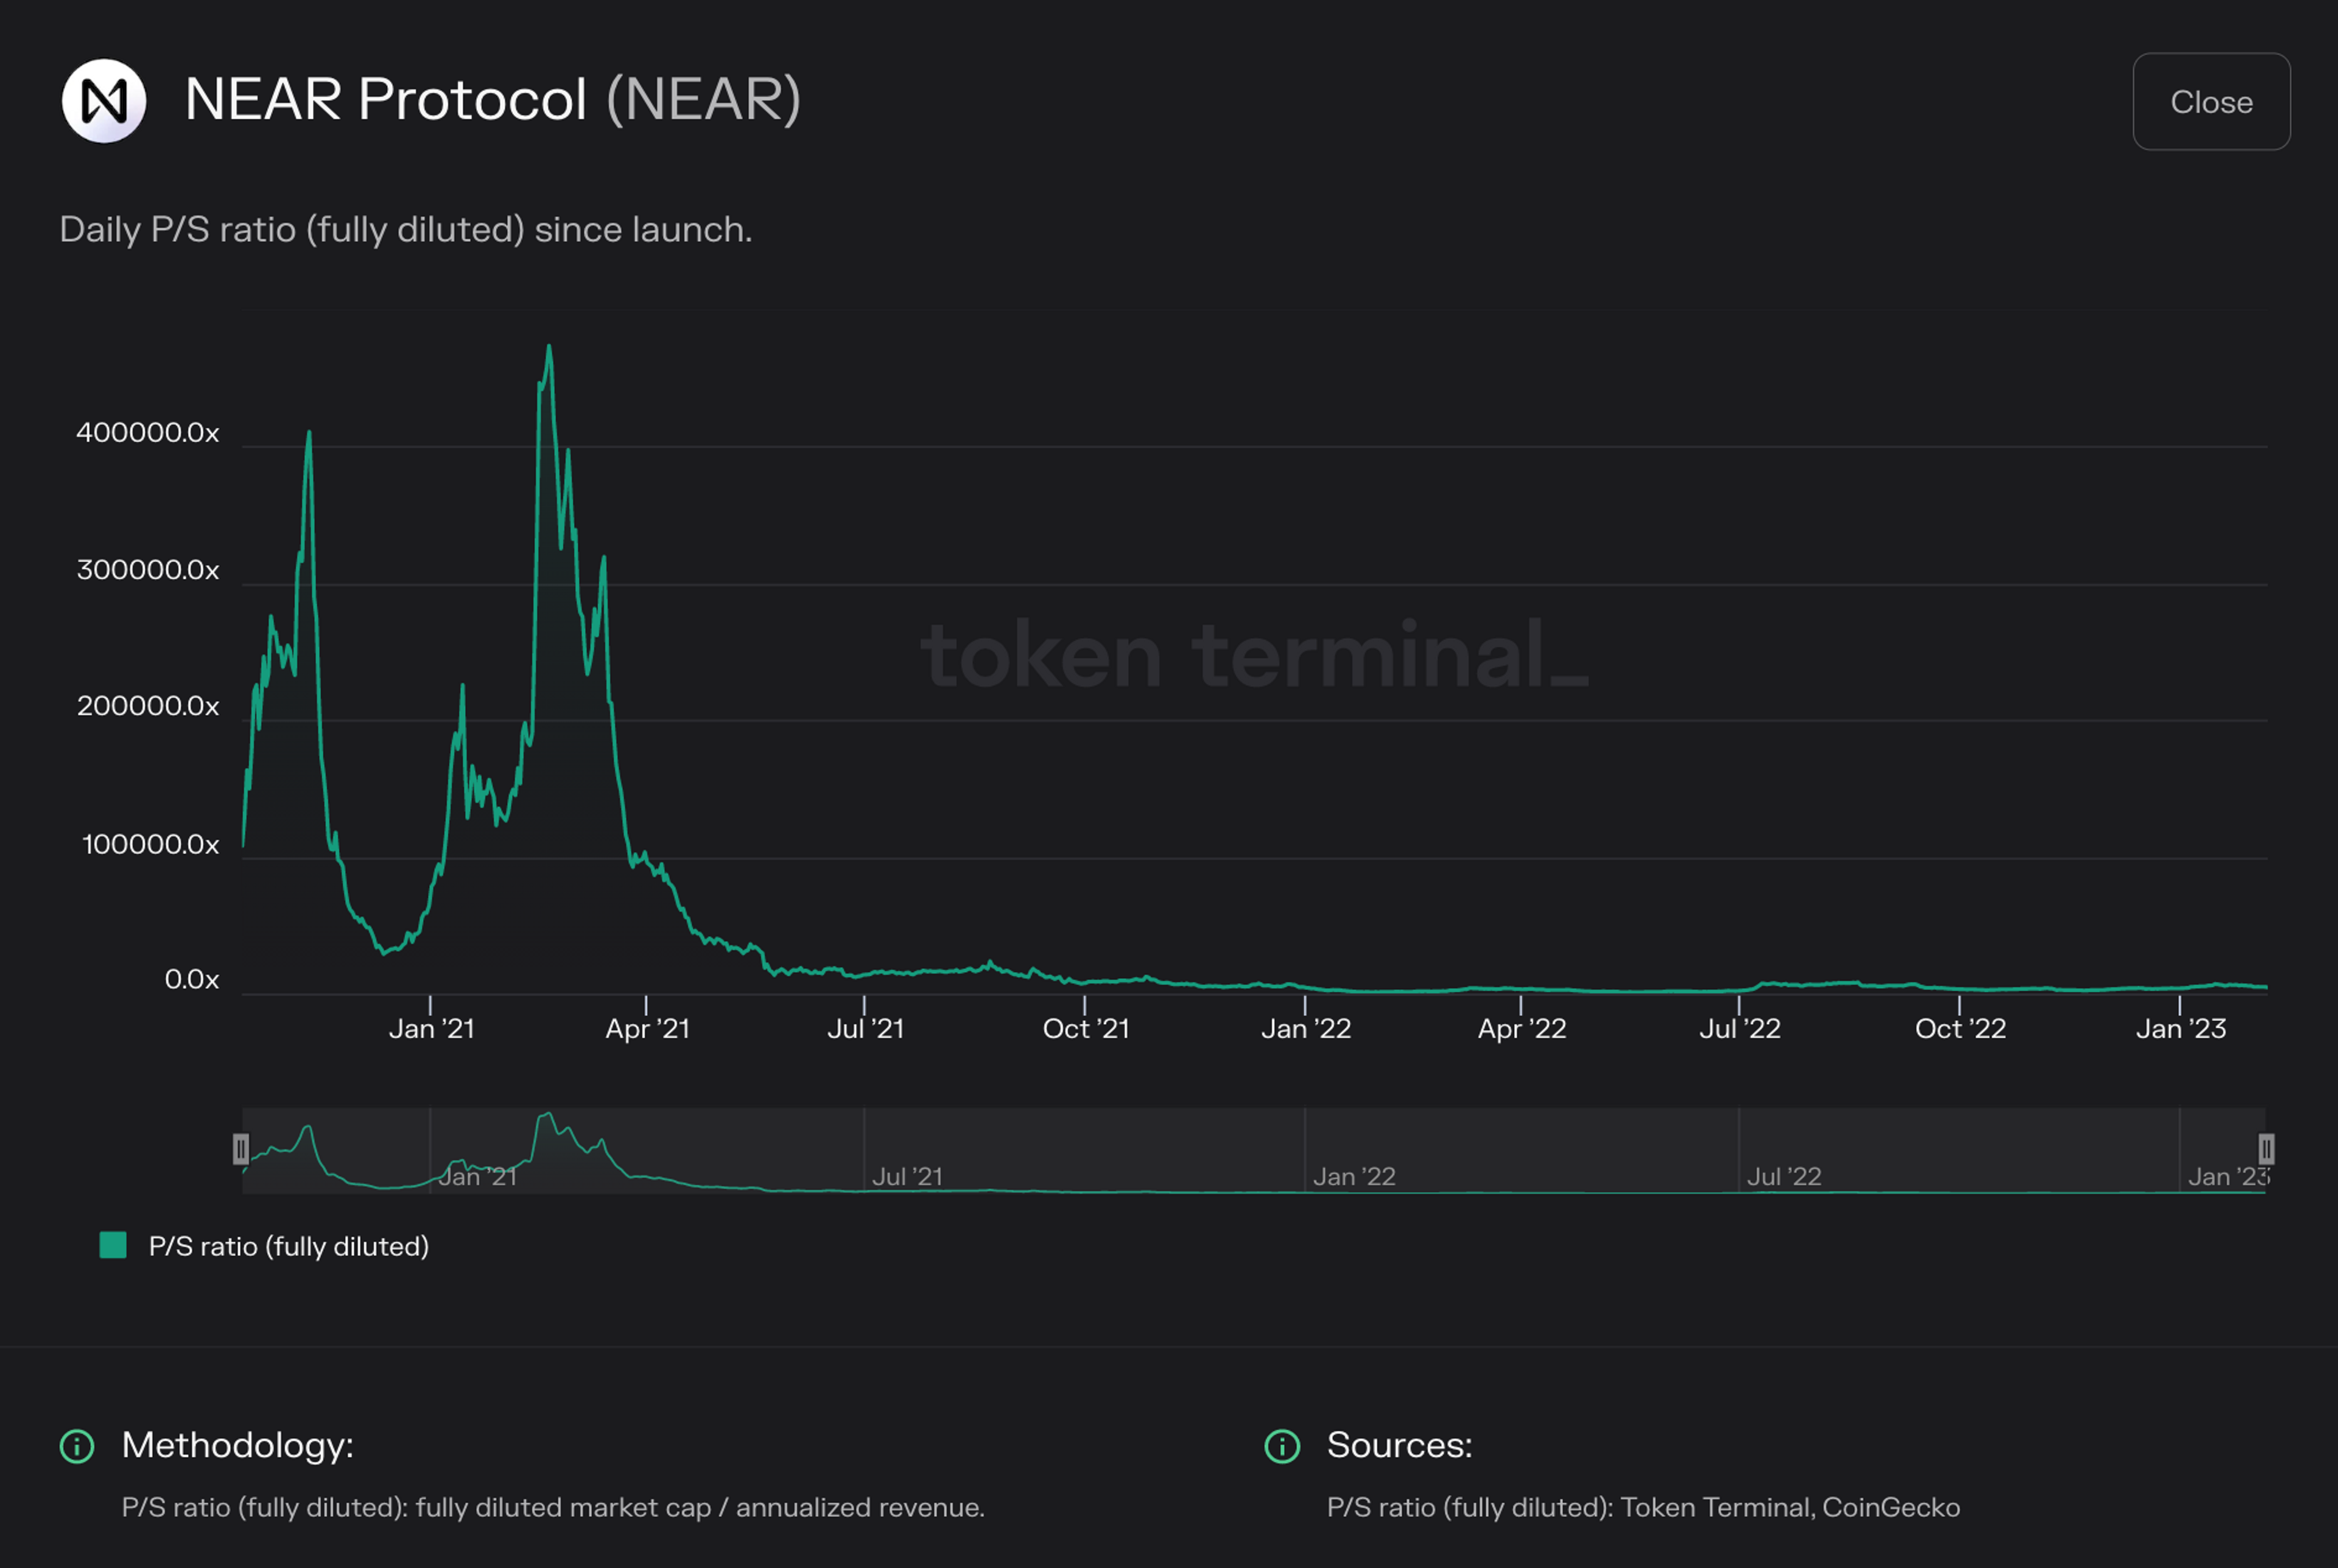 Chart of NEAR Protocol daily P/S ratio